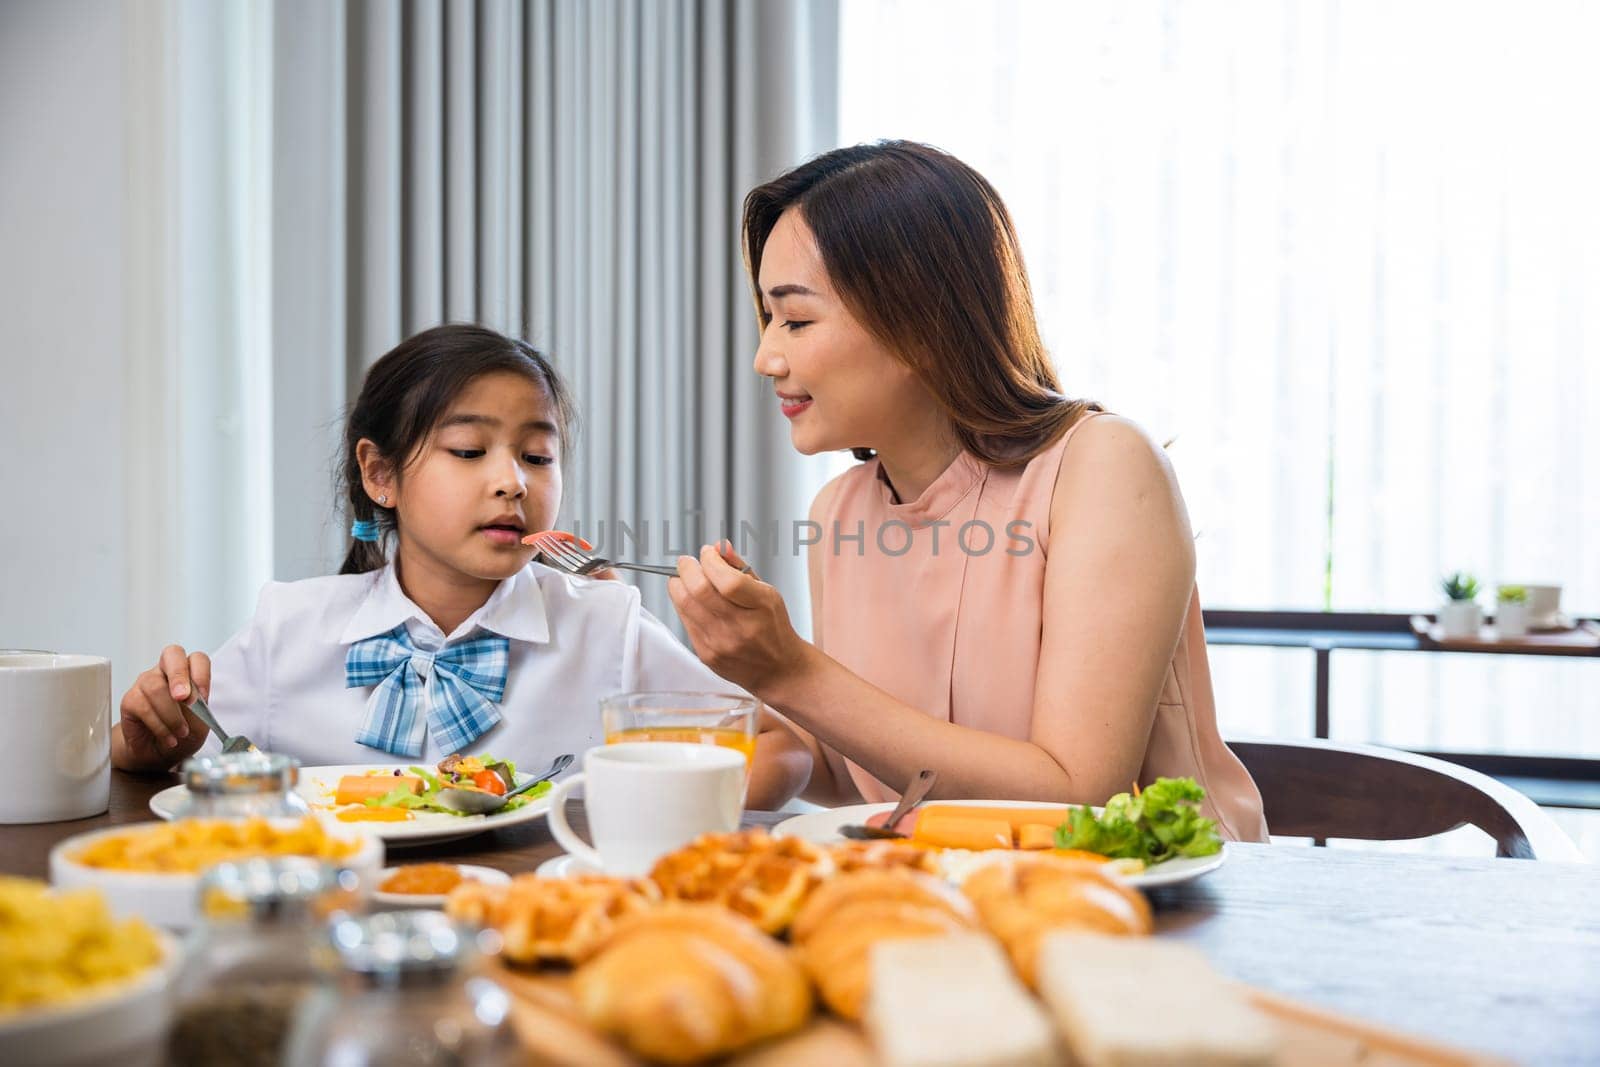 Asian family breakfast. smiling mother and child daughter having breakfast on food table, Healthy food at home before go to school, Mom and little preschooler have fun eating meal together